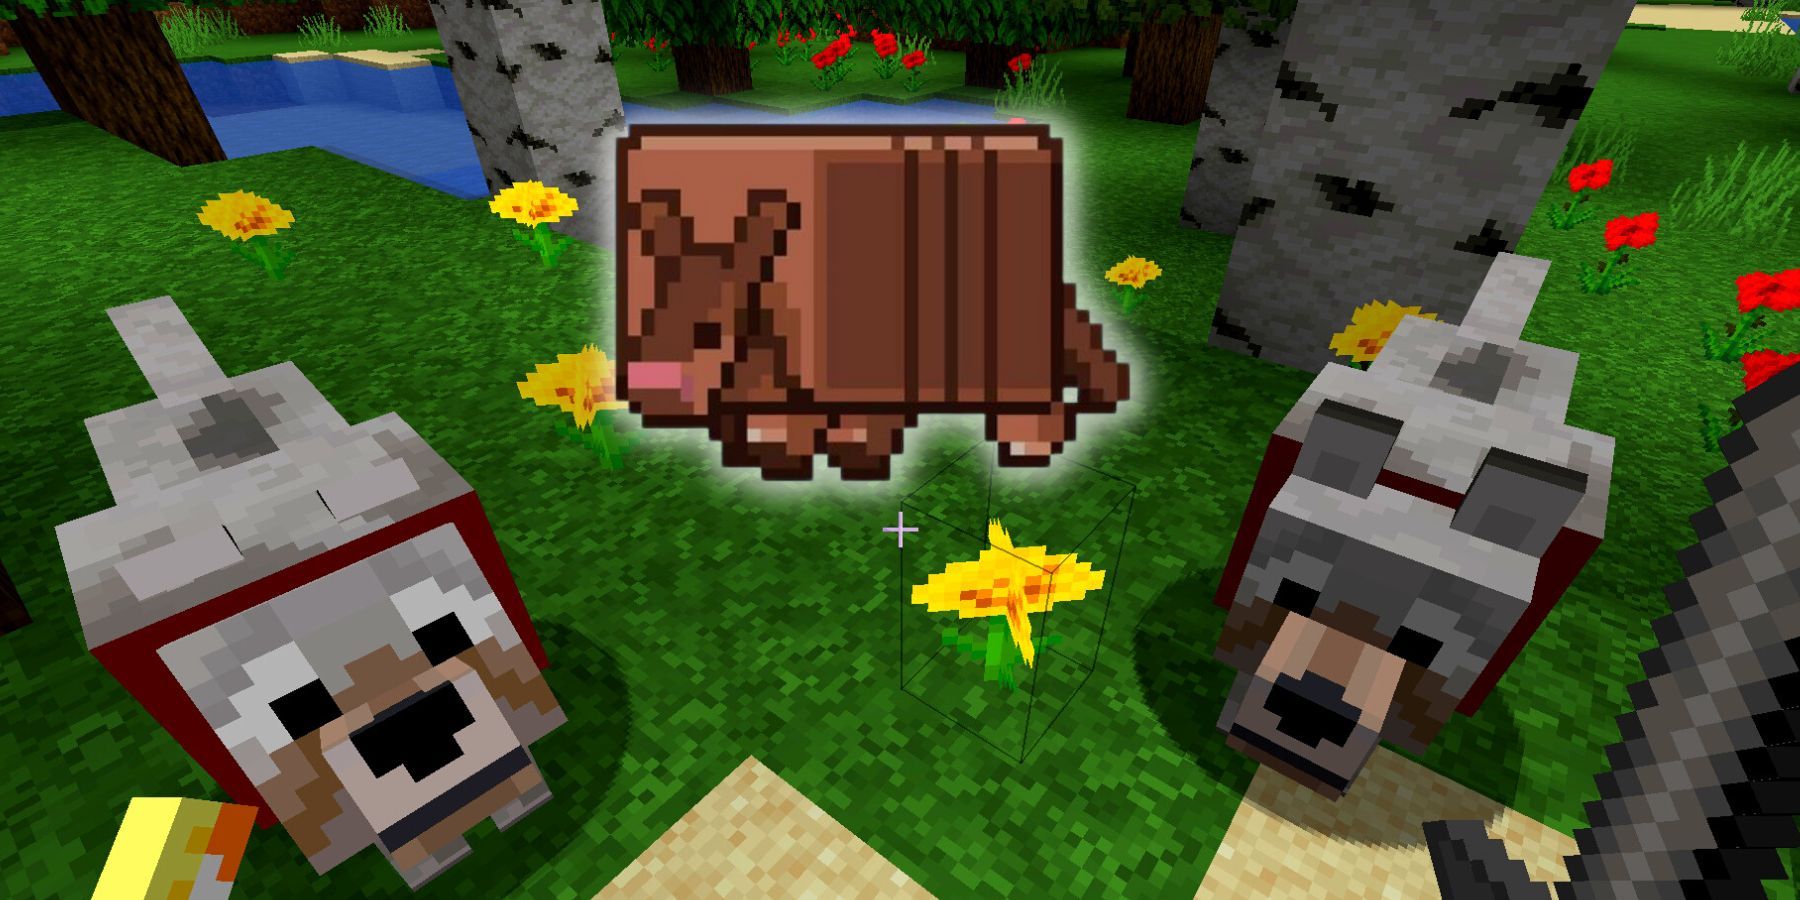 Minecraft on X: The armadillo received over 40% of the over 5